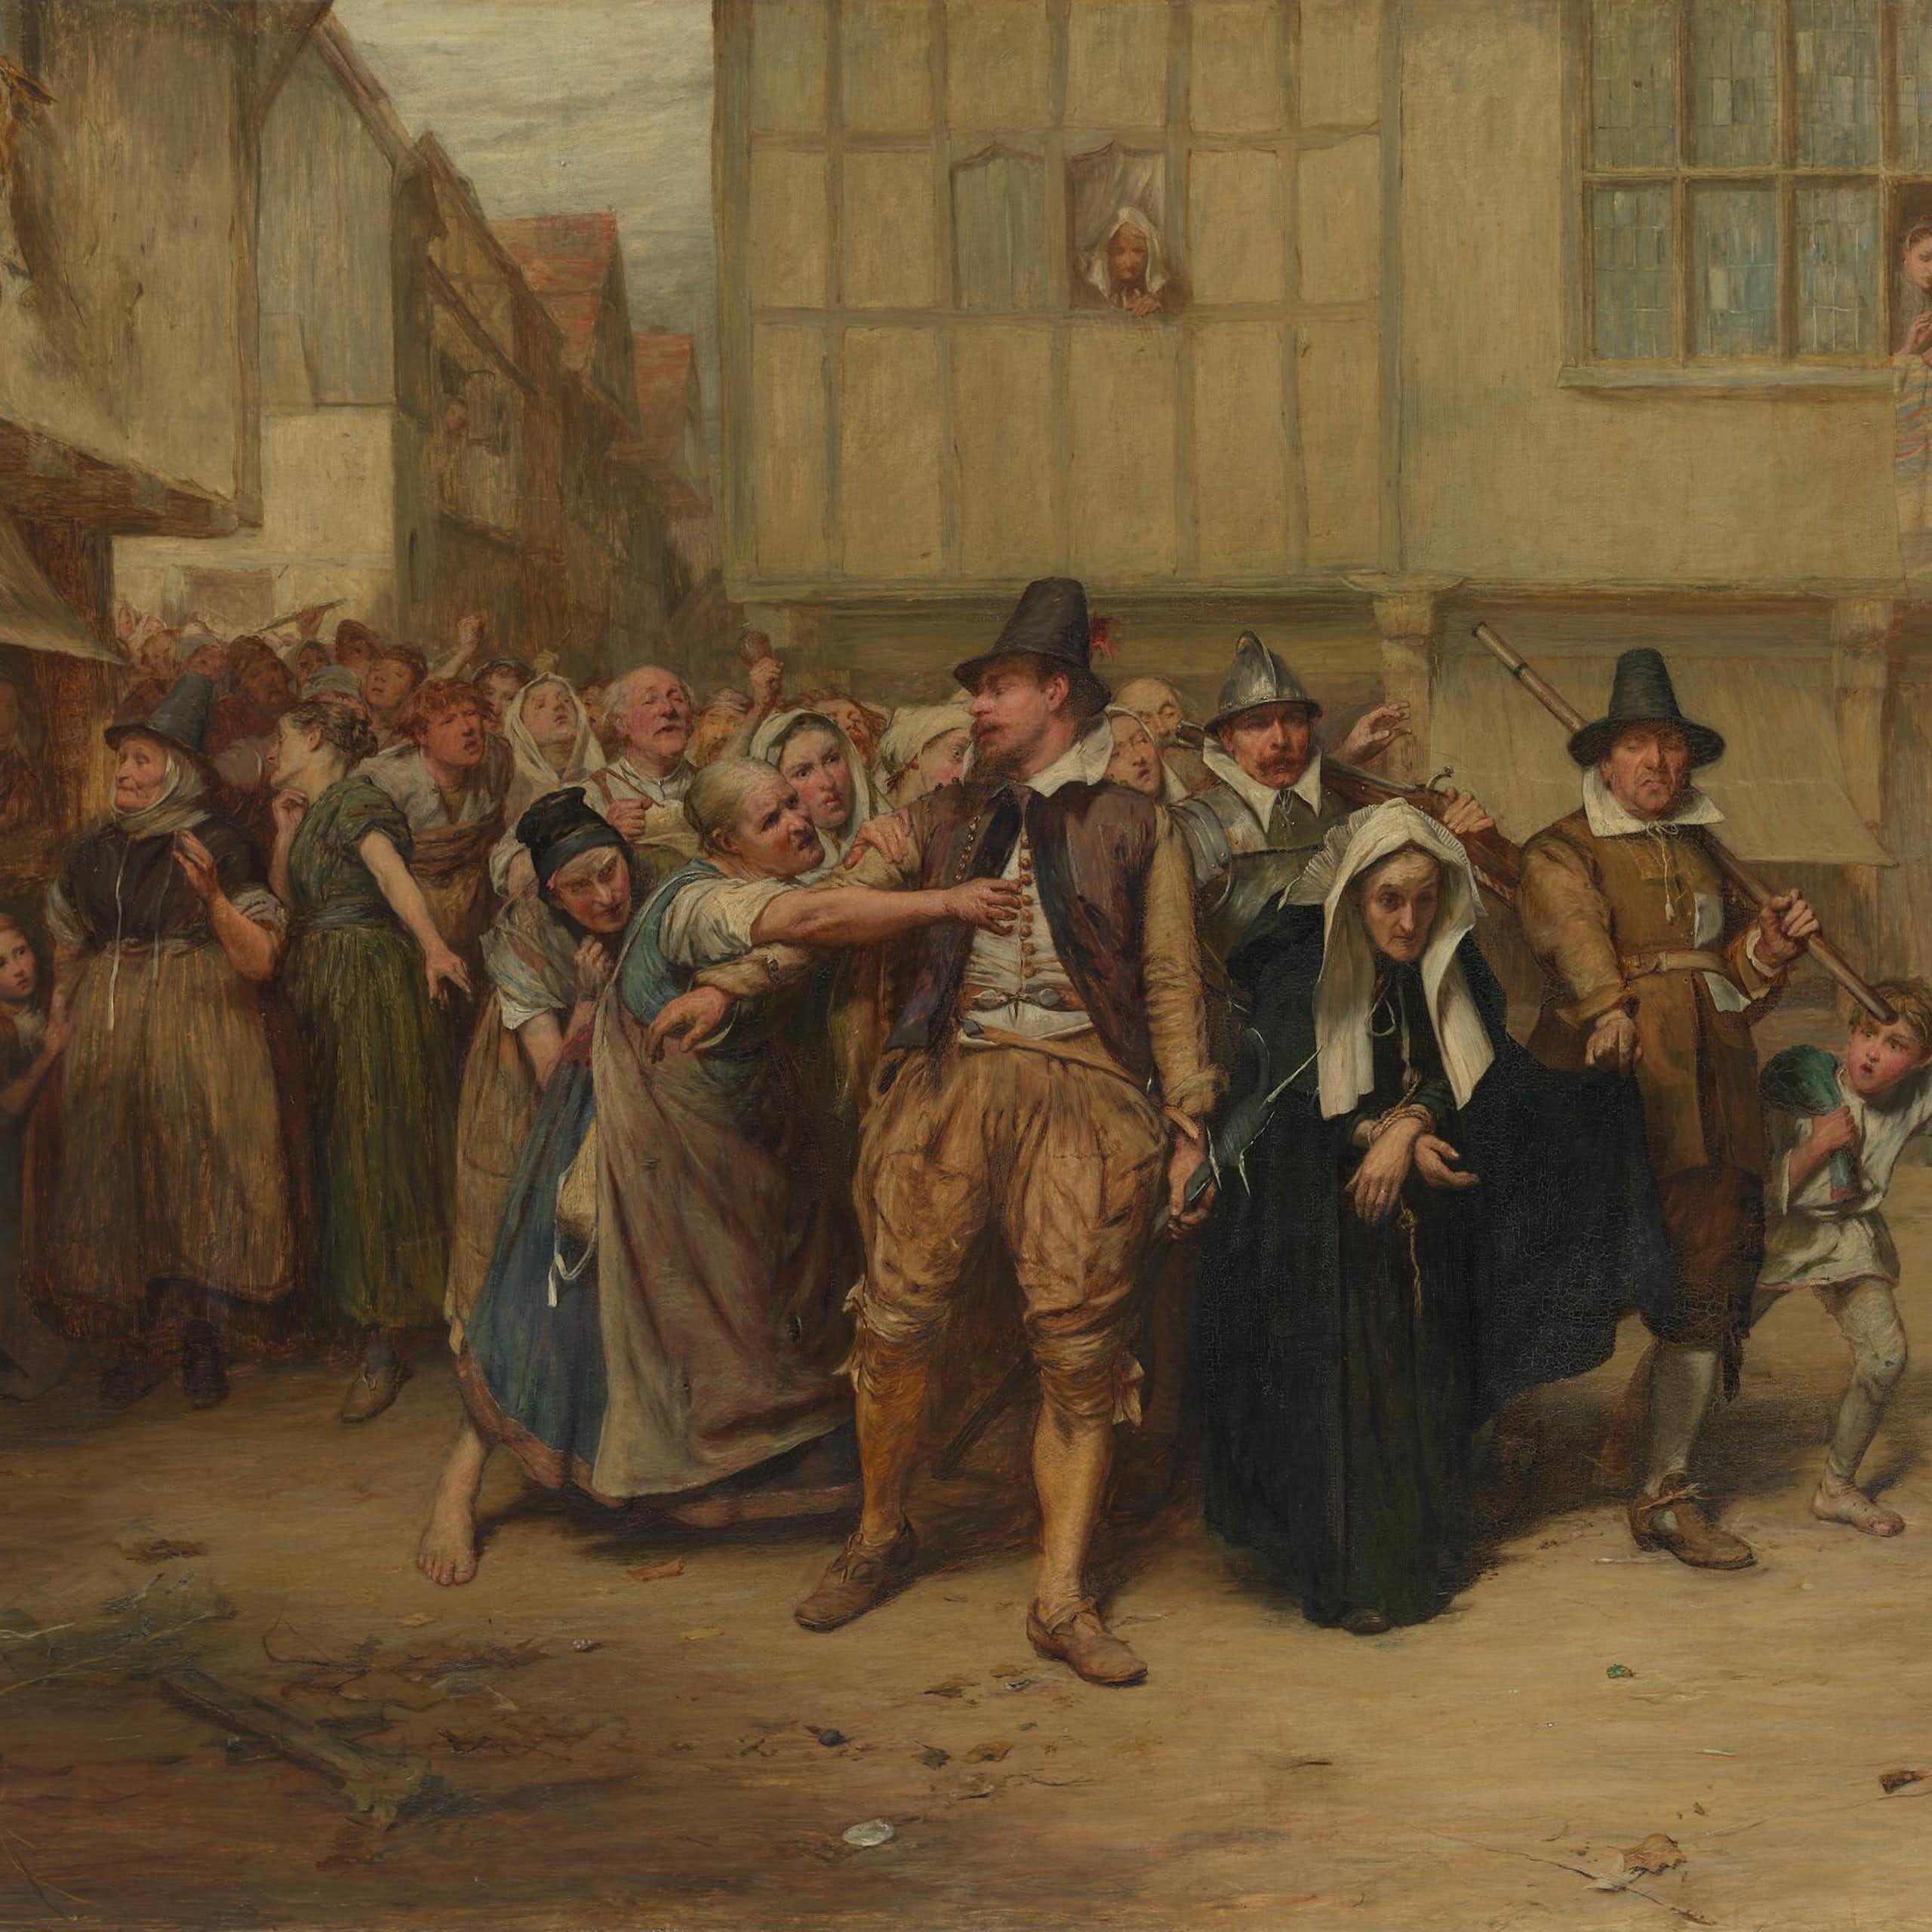 Painting of a woman being marched through a village by a mob